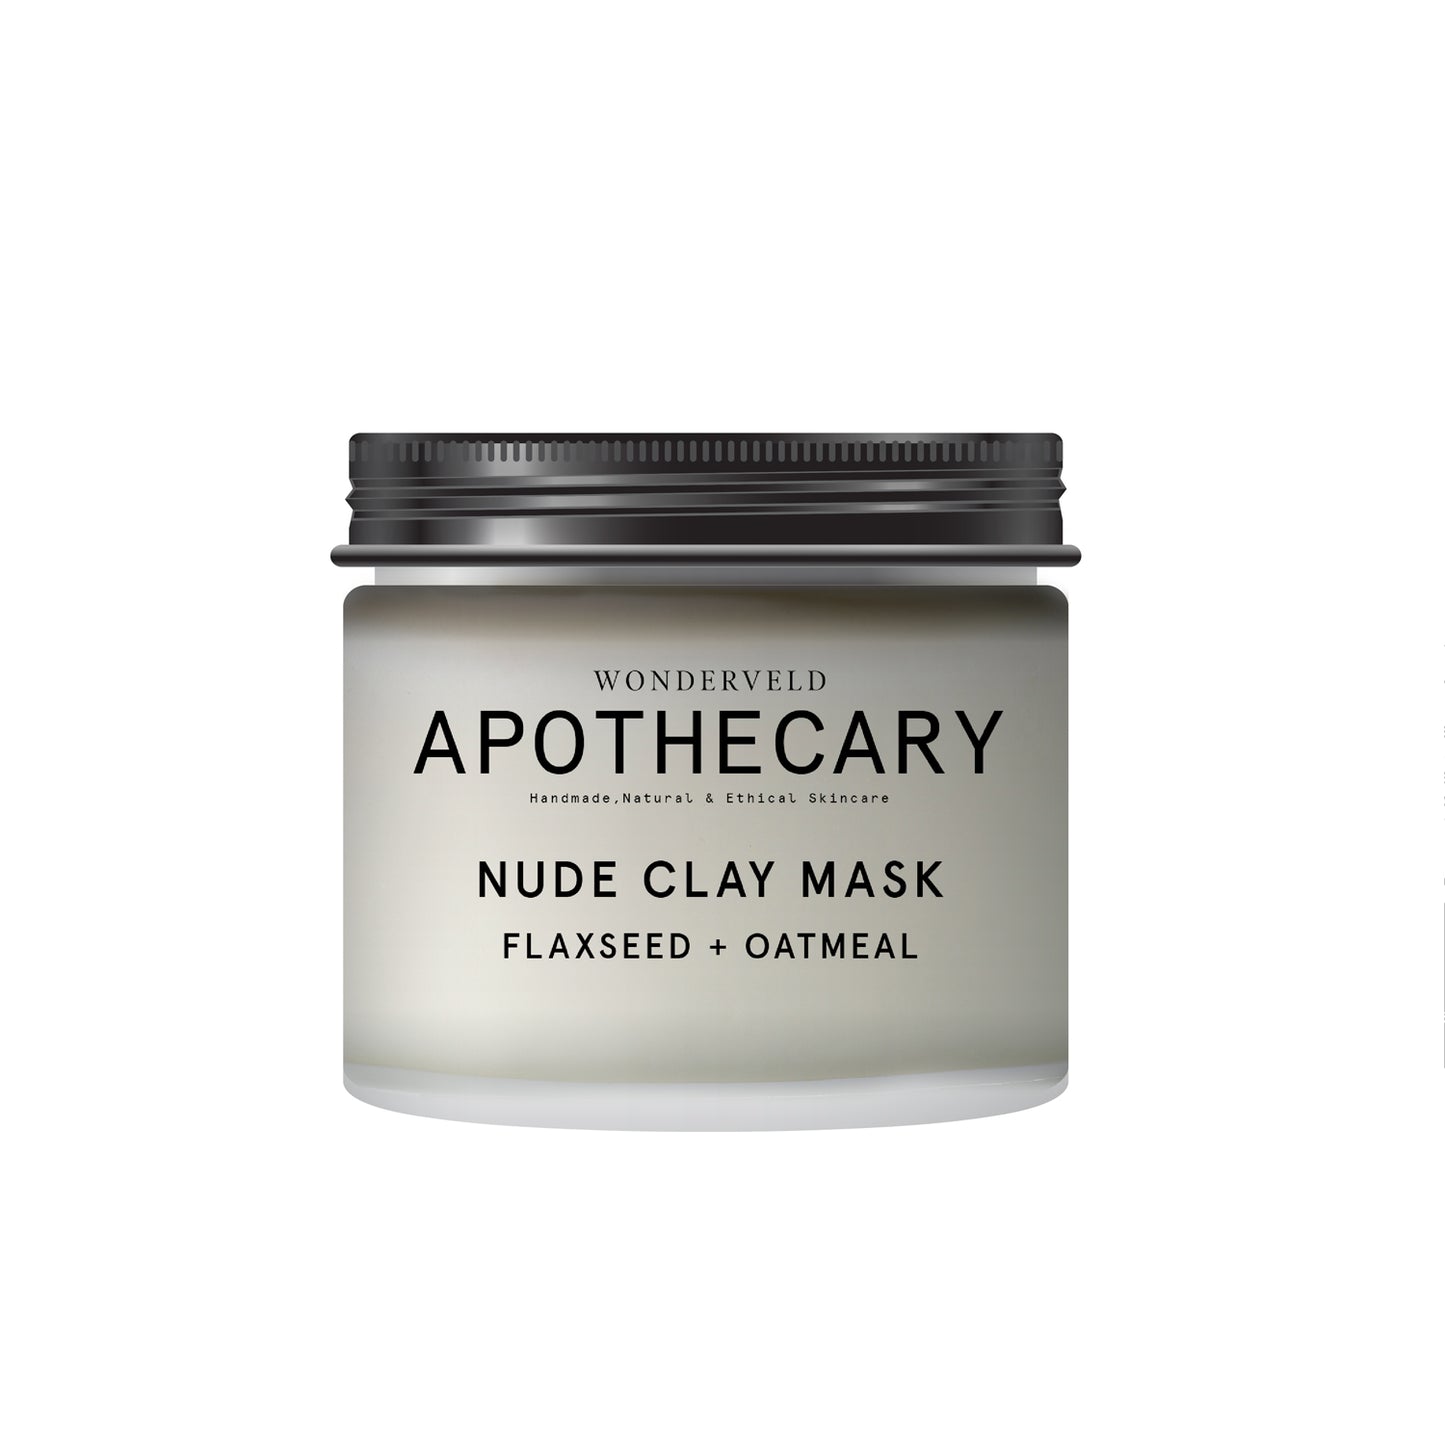 NUDE CLAY MASK